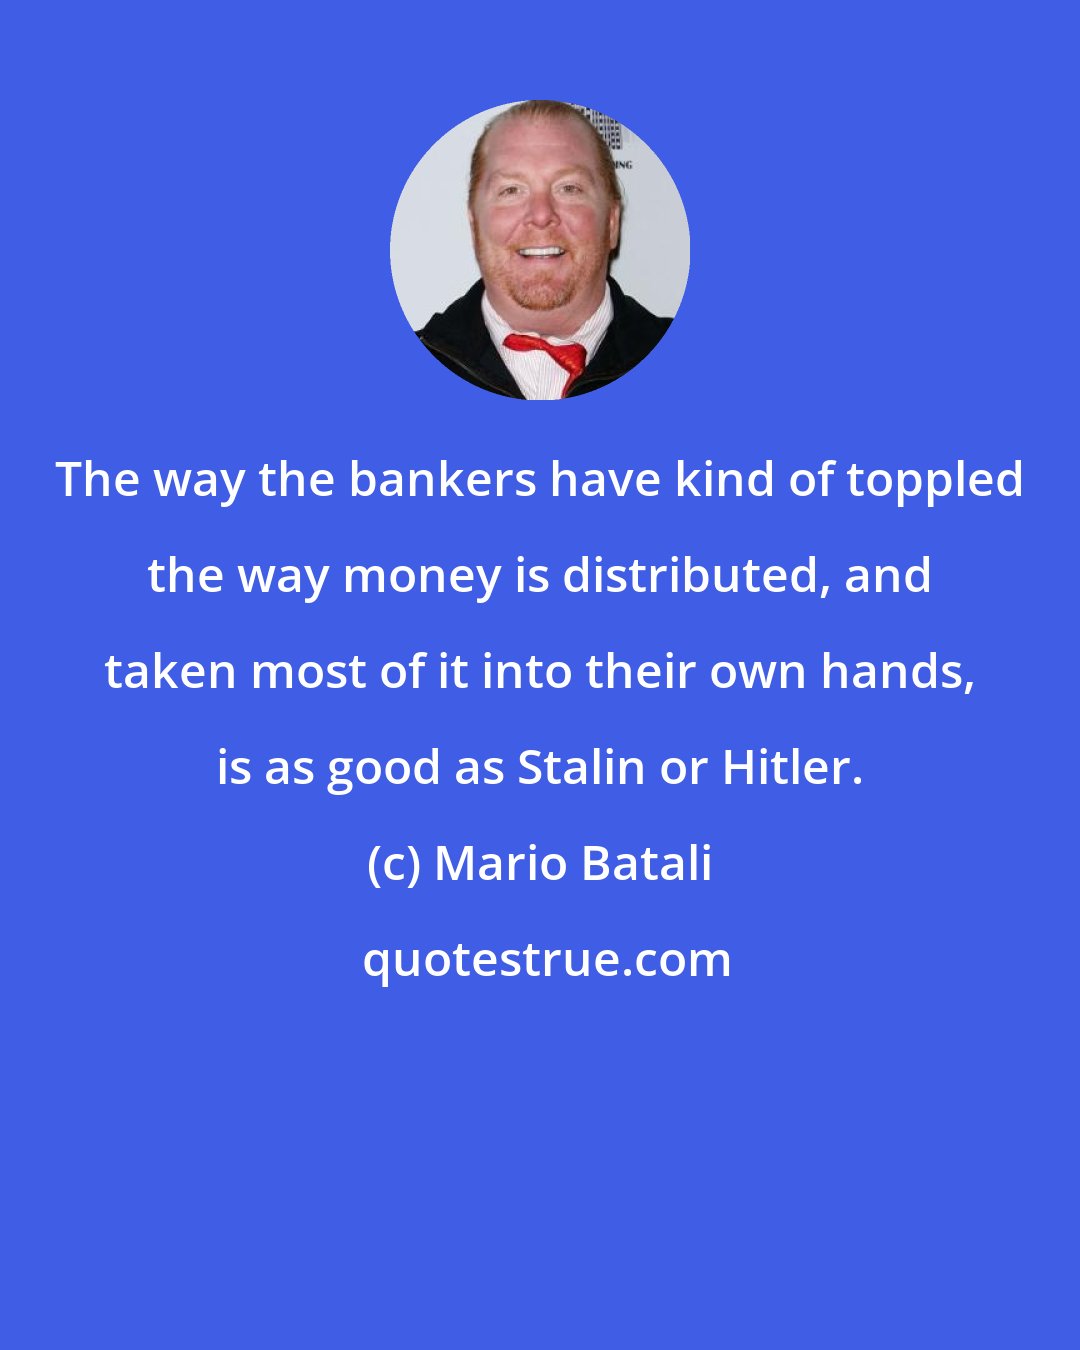 Mario Batali: The way the bankers have kind of toppled the way money is distributed, and taken most of it into their own hands, is as good as Stalin or Hitler.